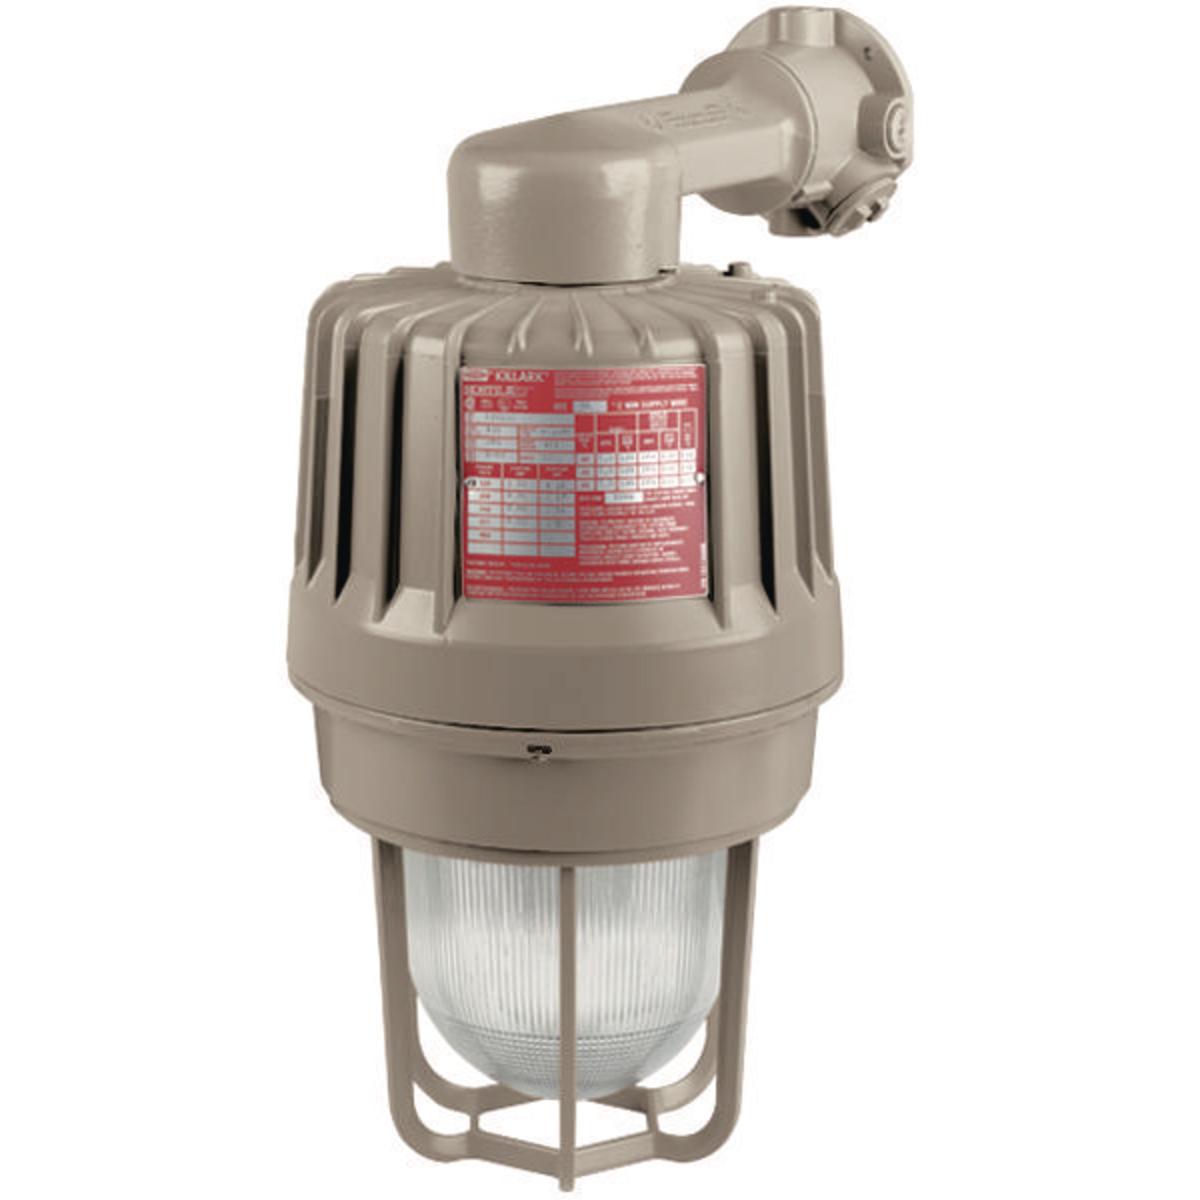 Hubbell EZS250B2 HID 250W Quadri-Volt High Pressure Sodium 3/4" Wall Mount  ; Three light sources – High Pressure Sodium (50-400W), Metal Halide (70-400W) and Pulse Start Metal Halide (175-400W) ; Mounting choice –Pendant, ceiling, 25˚ stanchion or 90˚ wall mount, all wit